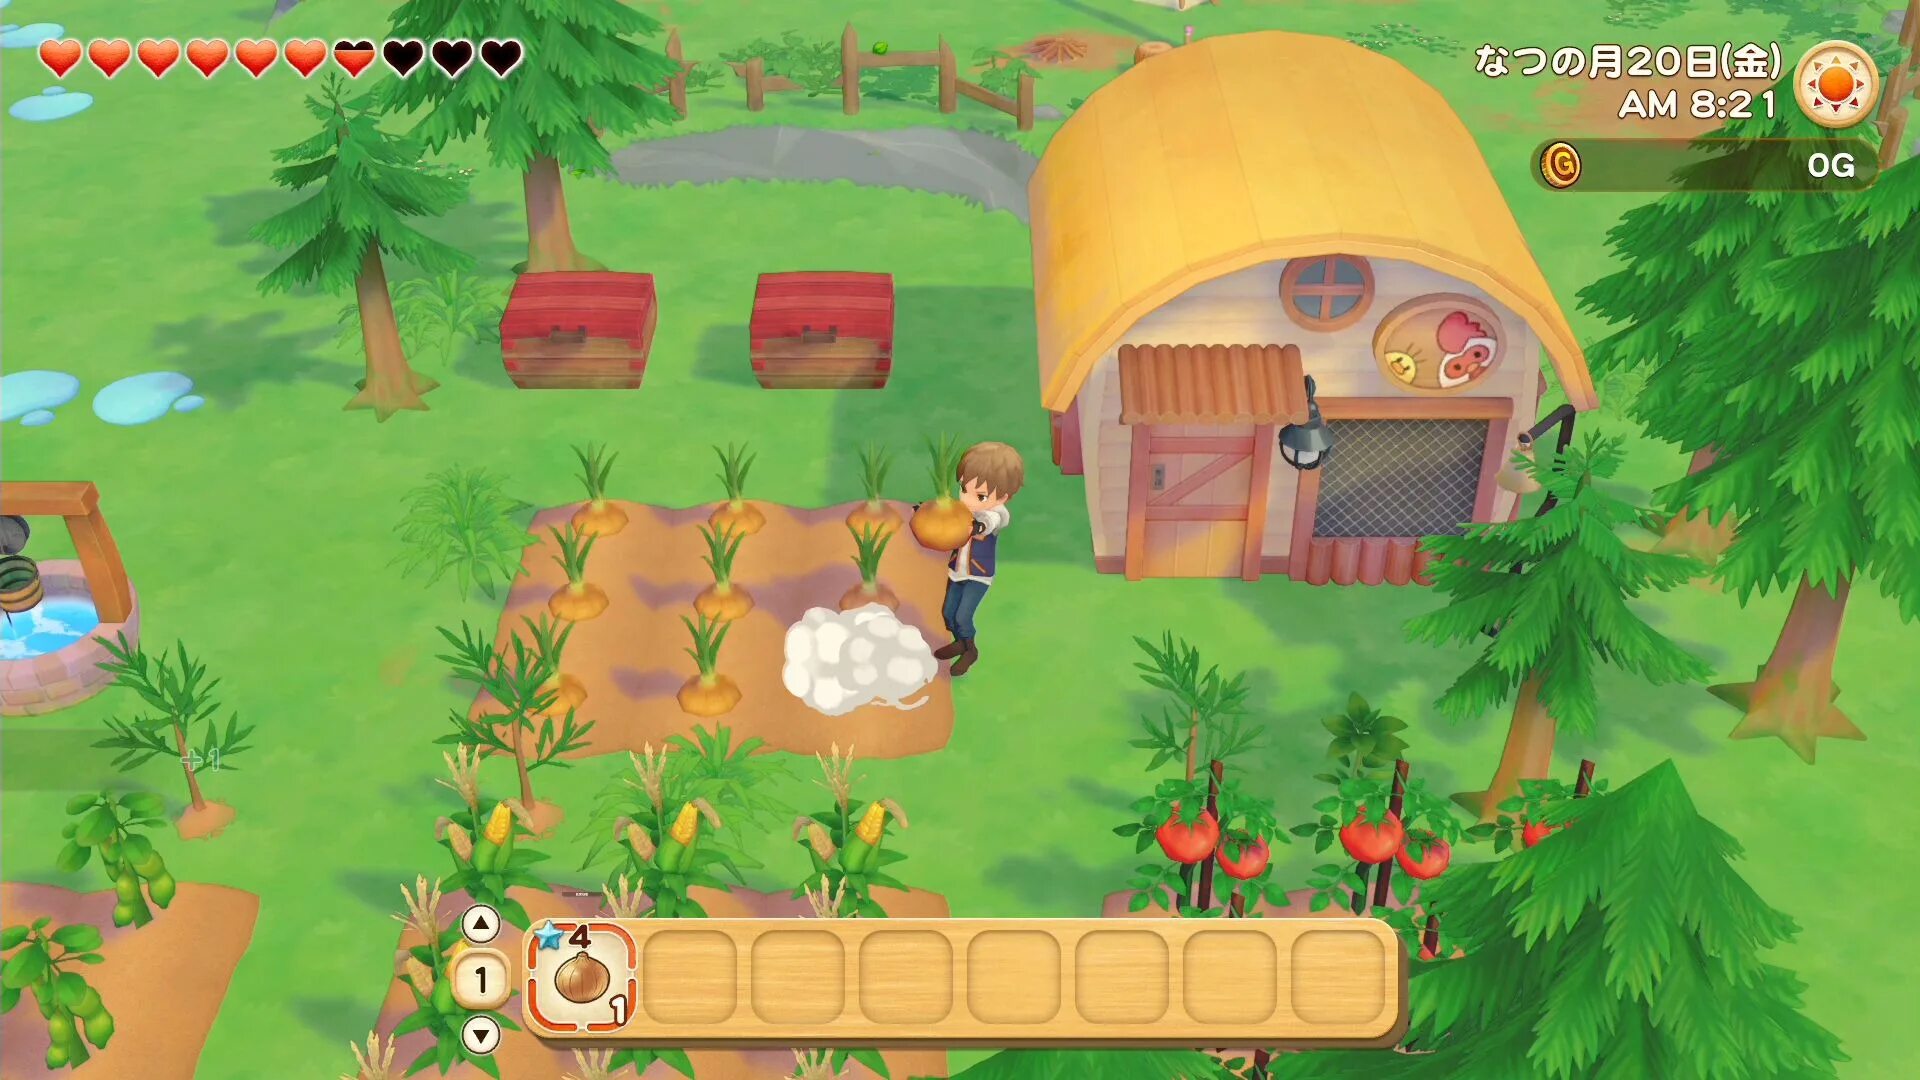 Story of Seasons: Pioneers of Olive город. Story of Seasons Pioneers of Olive Town персонажи. Story of Seasons: Pioneers of Olive Town Скриншоты. Story of Seasons Pioneers of Olive Town [NSZ]. Новые игры рассказ